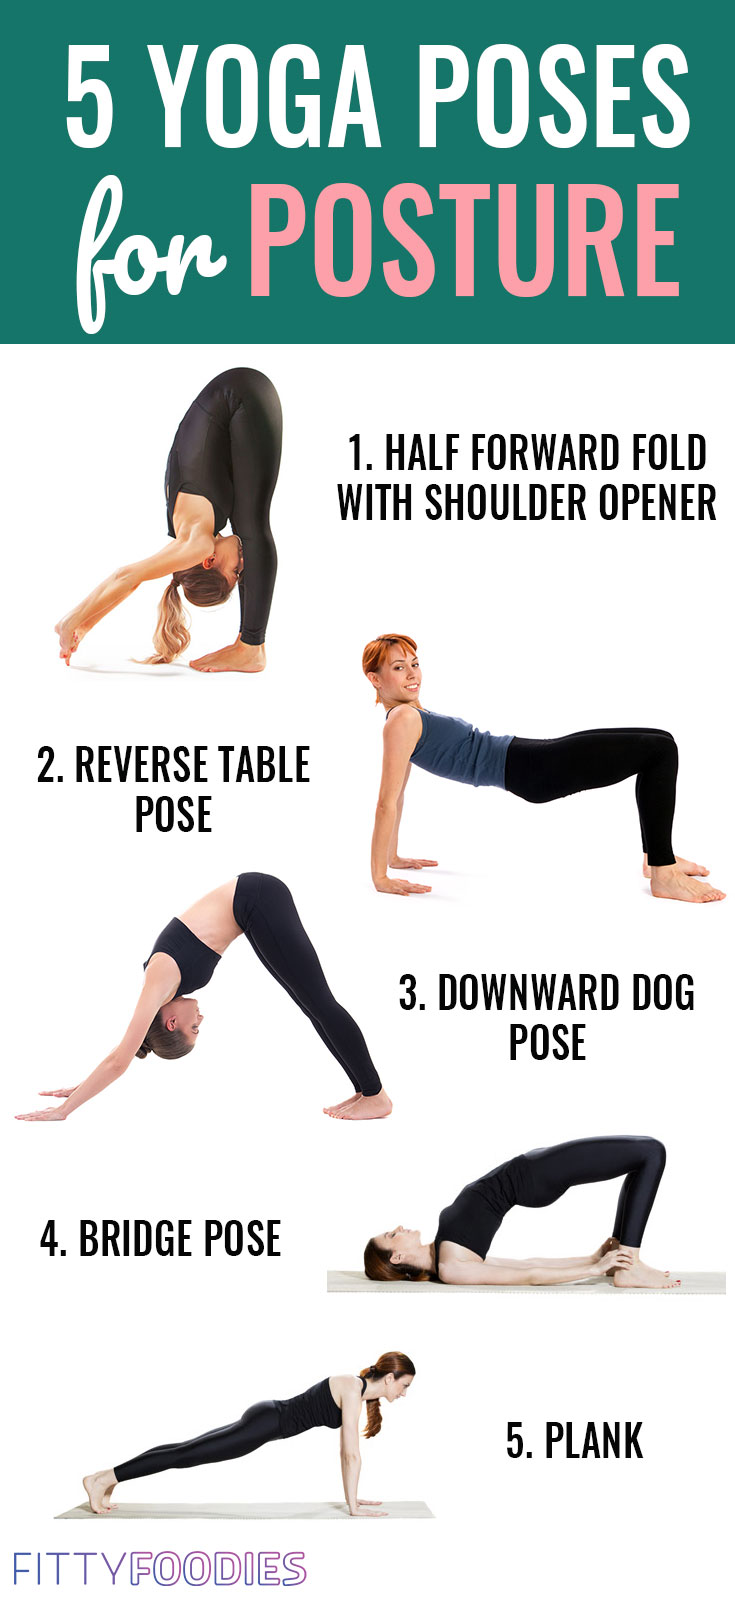 5 Yoga Poses For Posture: Time To Straighten Up - FittyFoodies